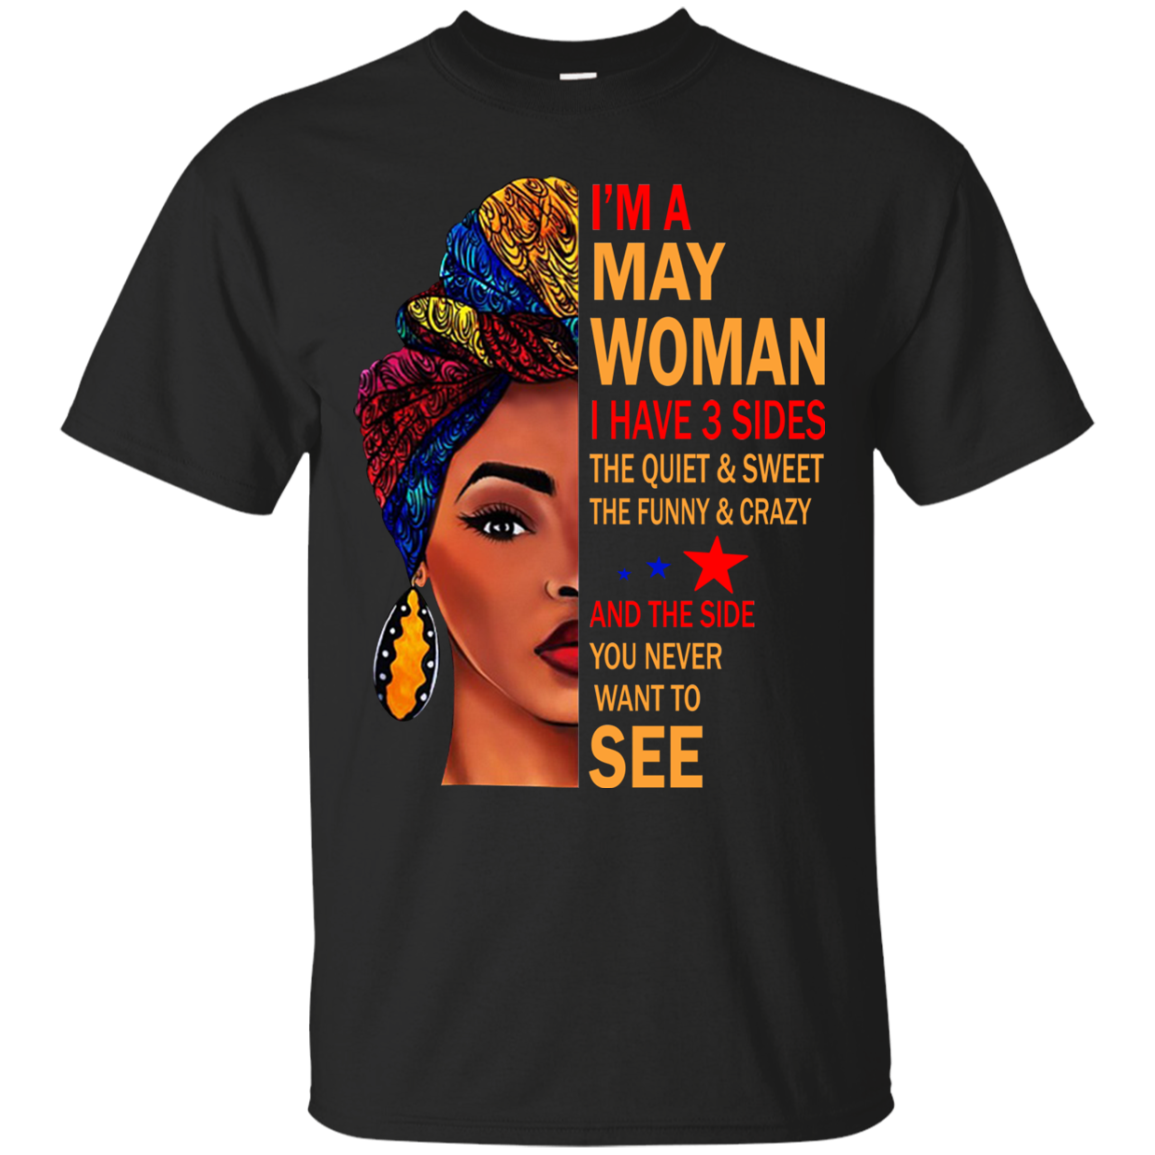 I'm A May Woman - The Quiet & Sweet - The Funny & Crazy Shirt